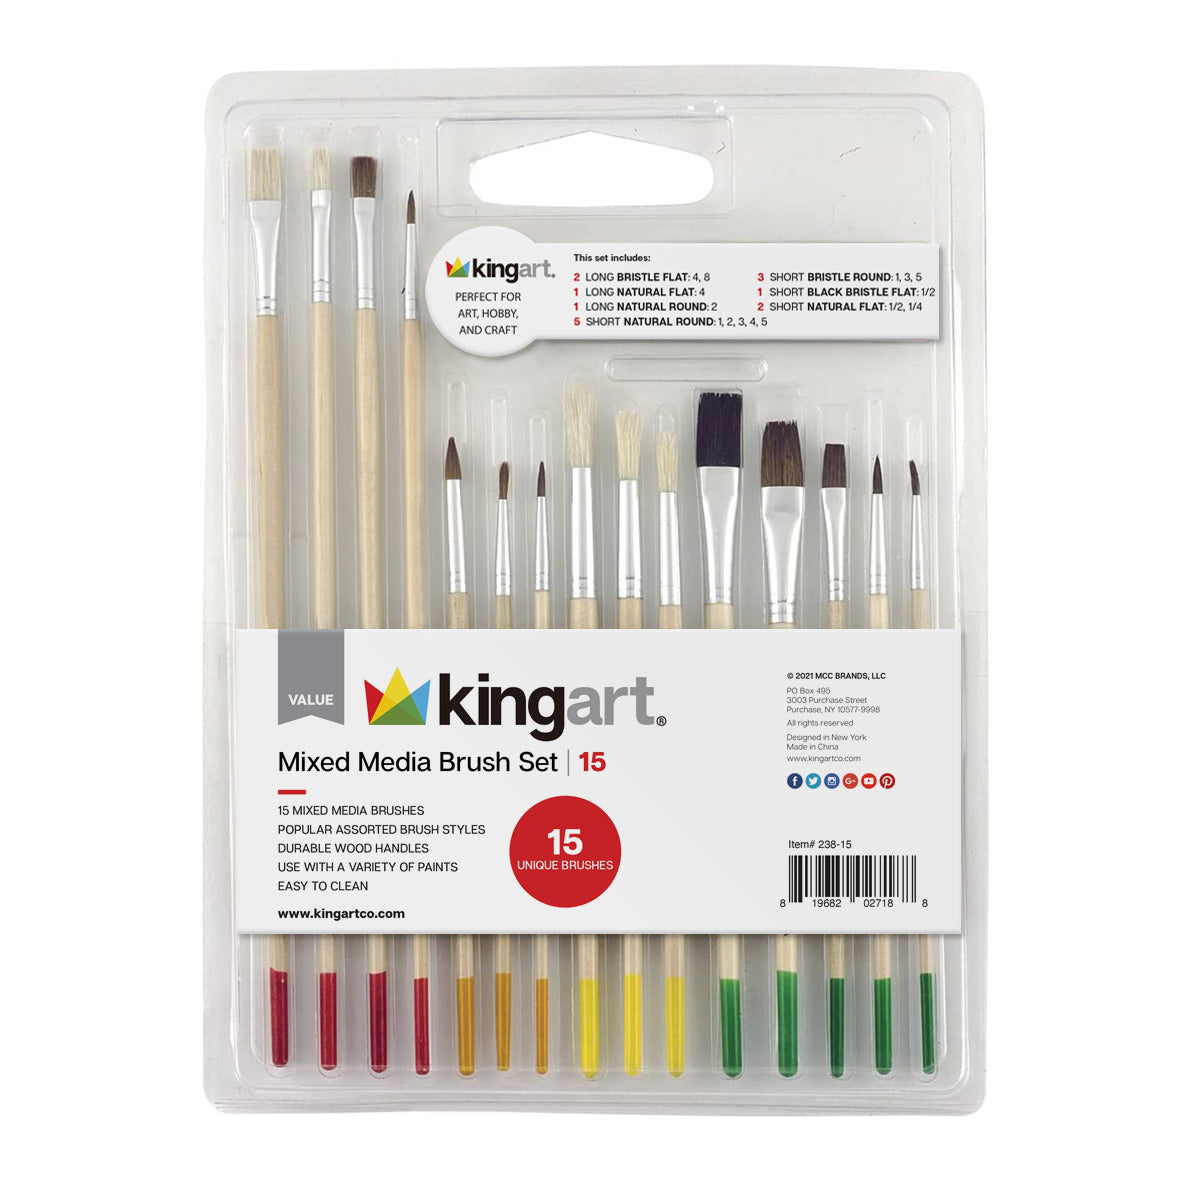 Hello Hobby Assorted Craft Brush and Foam 25pc Set, Adult, Teens